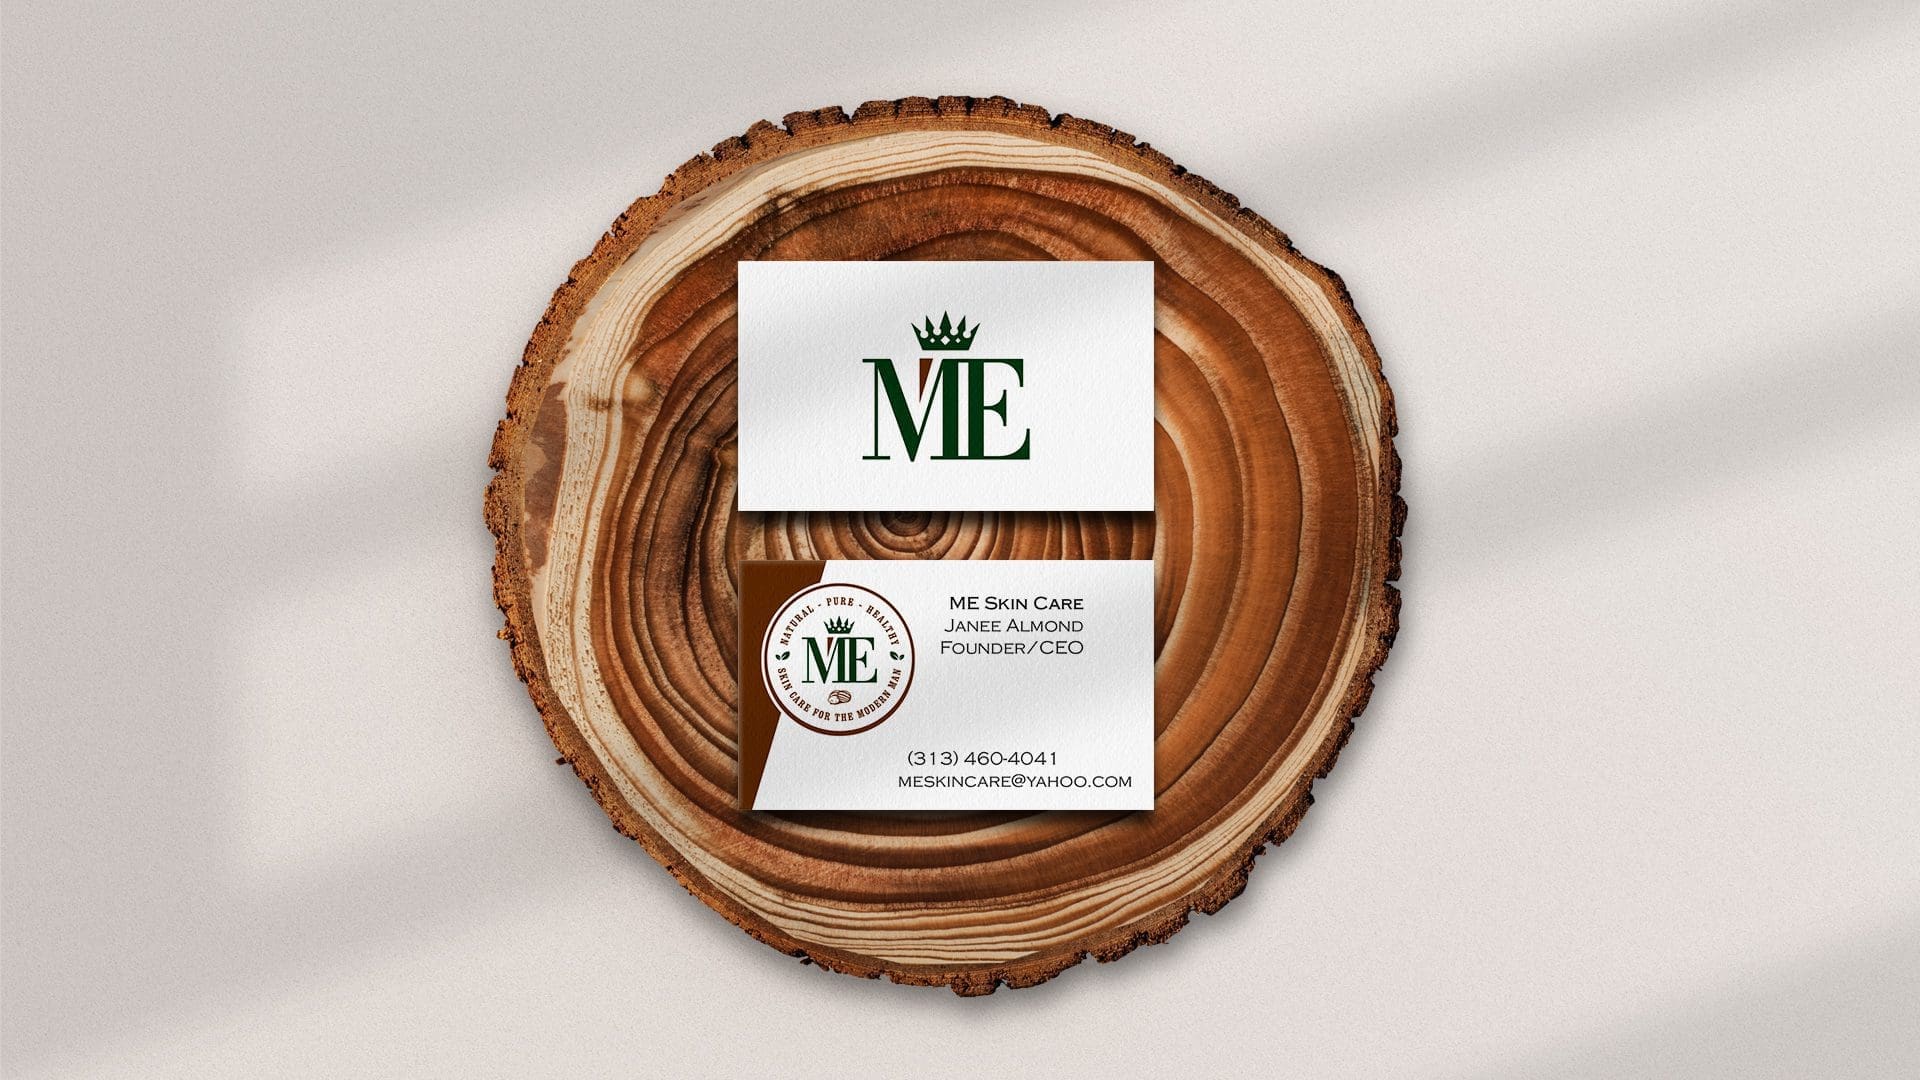 ME - Janee Business Card (2)